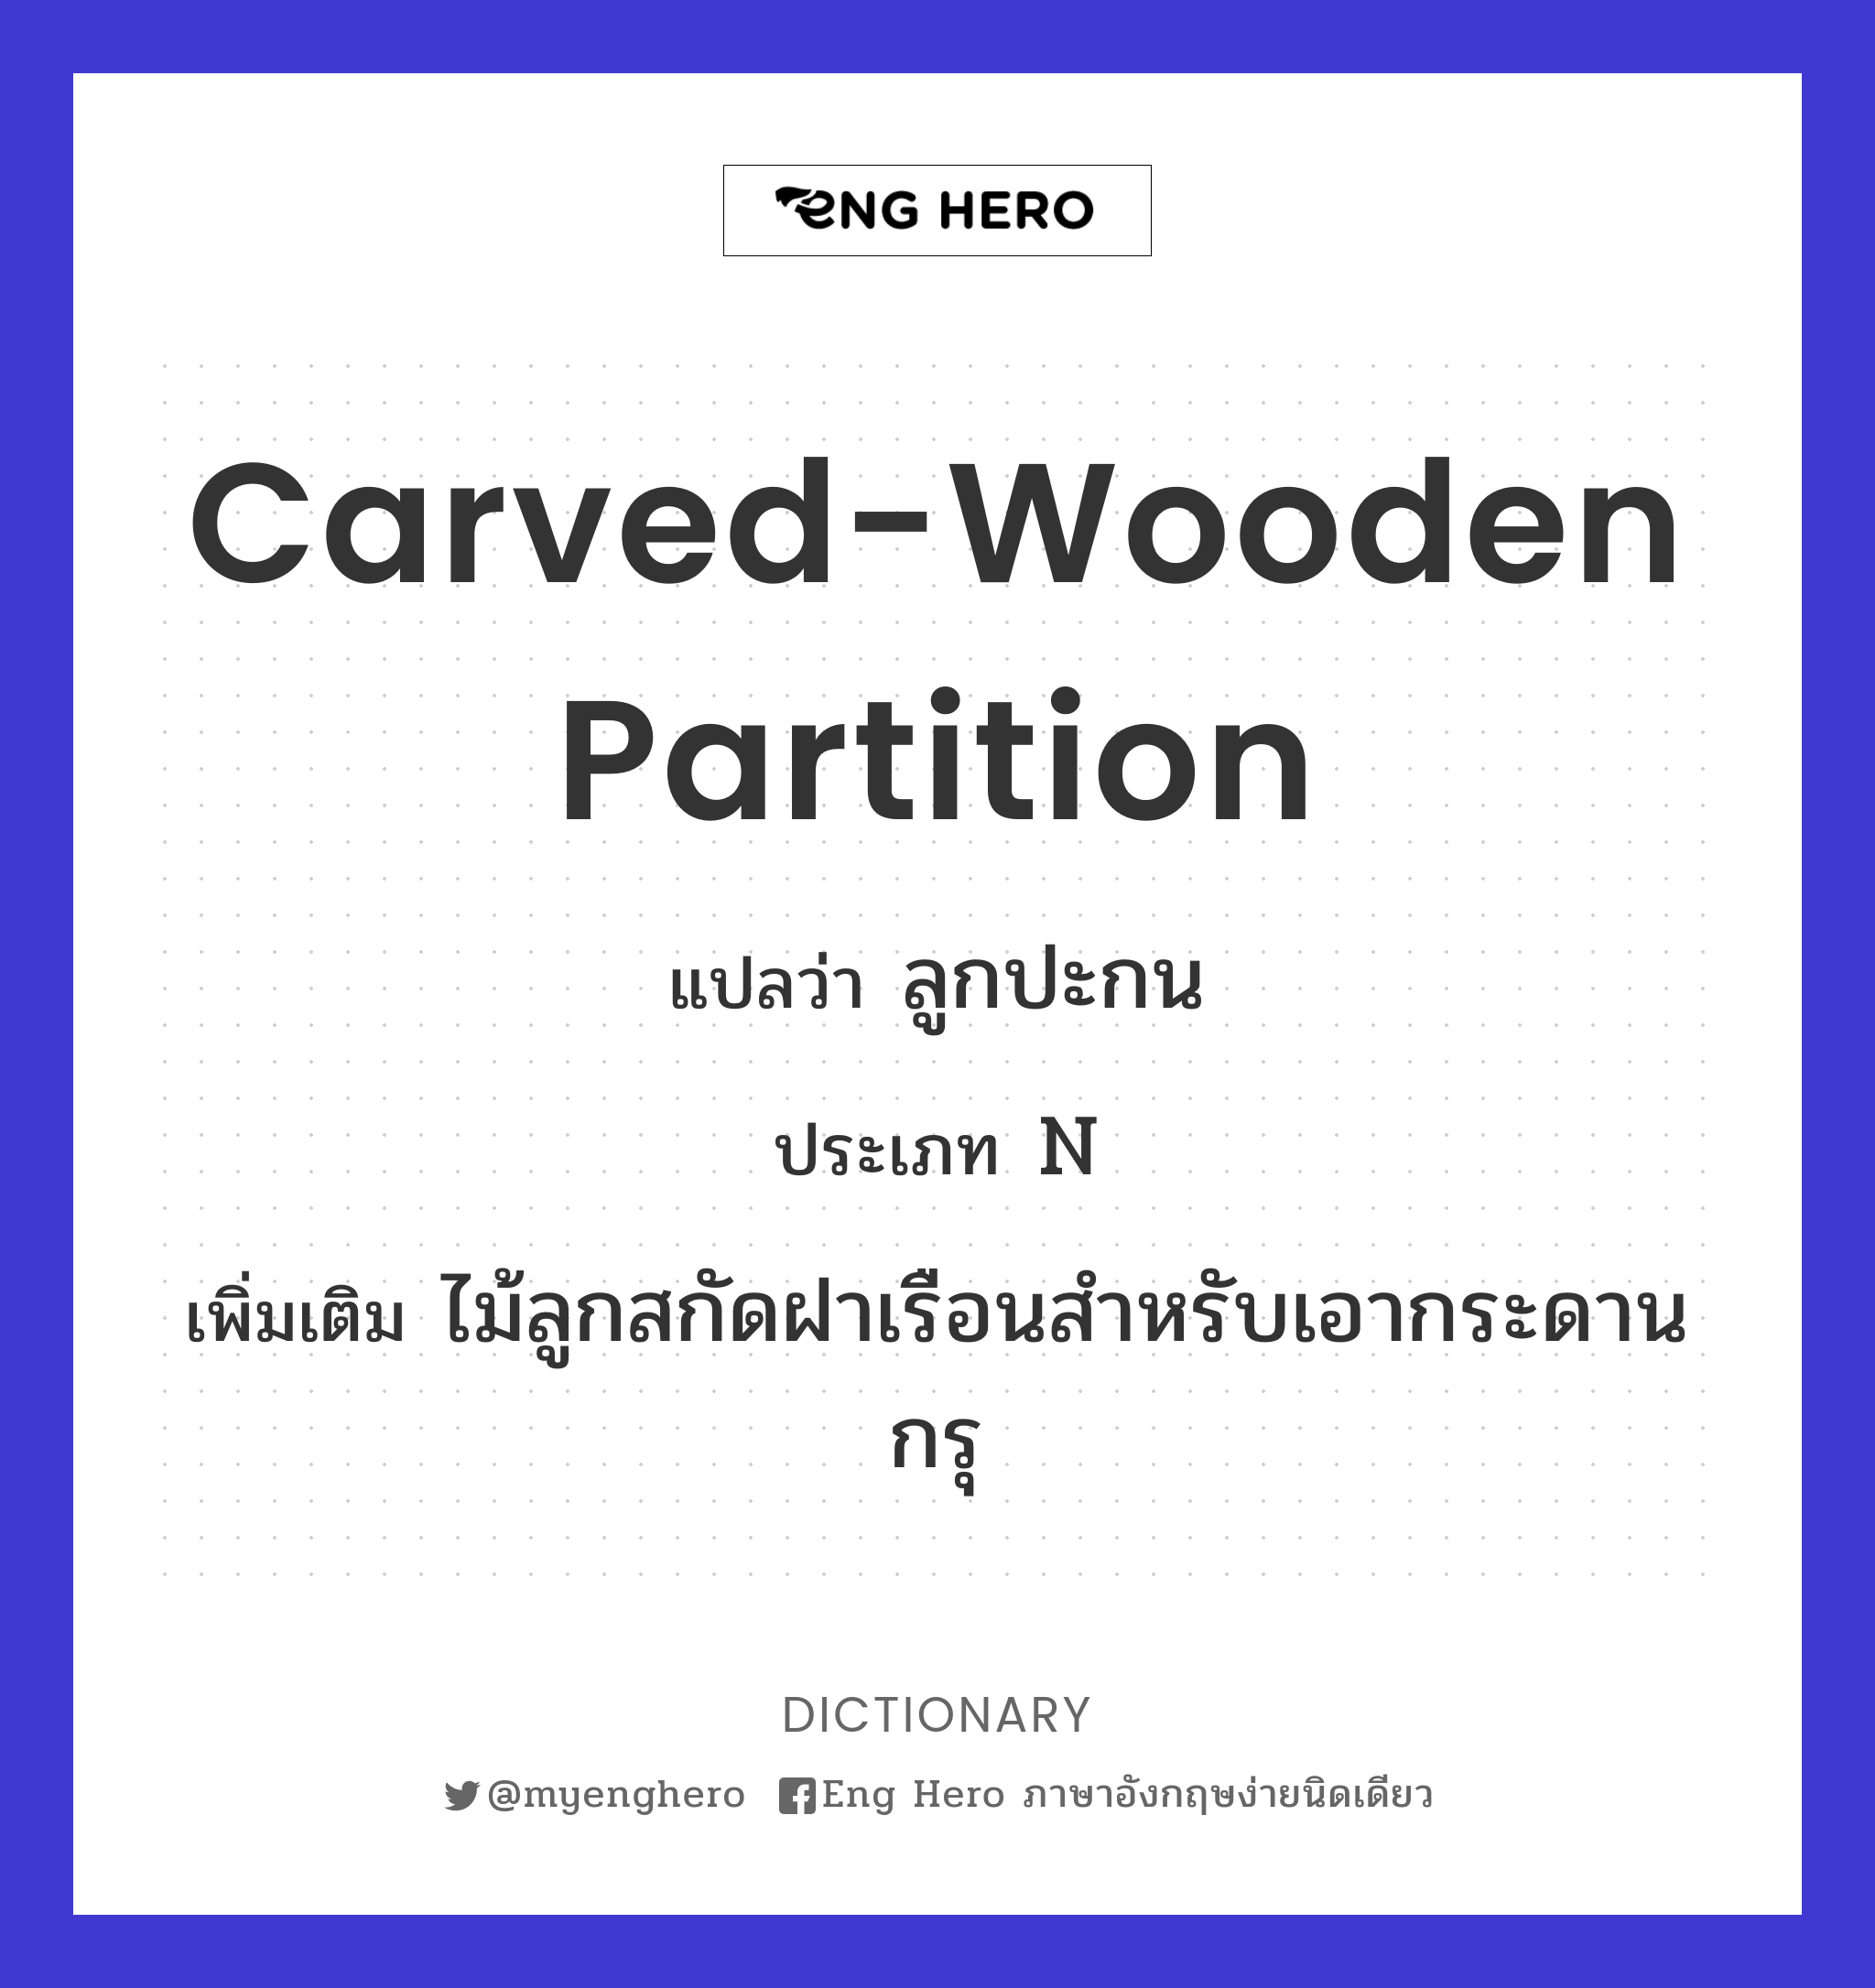 carved-wooden partition